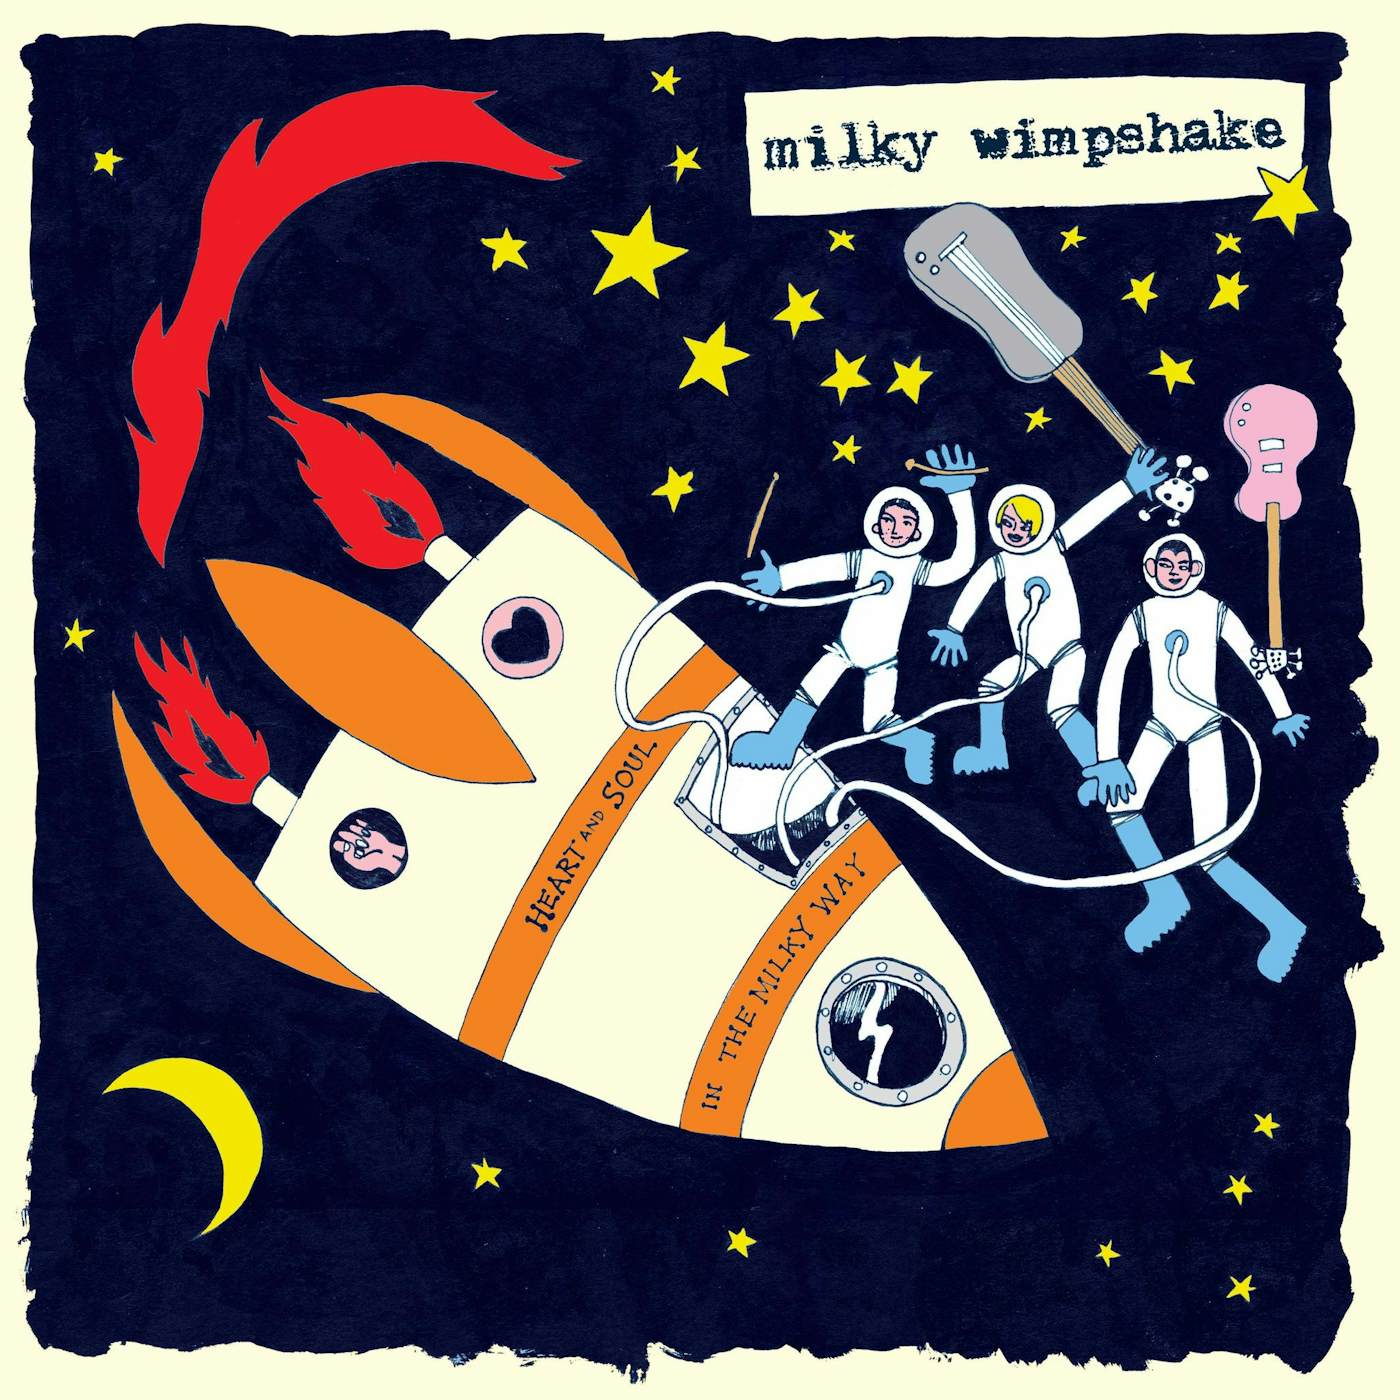 Milky Wimpshake 'Heart And Soul In The Milky Way' Vinyl Record